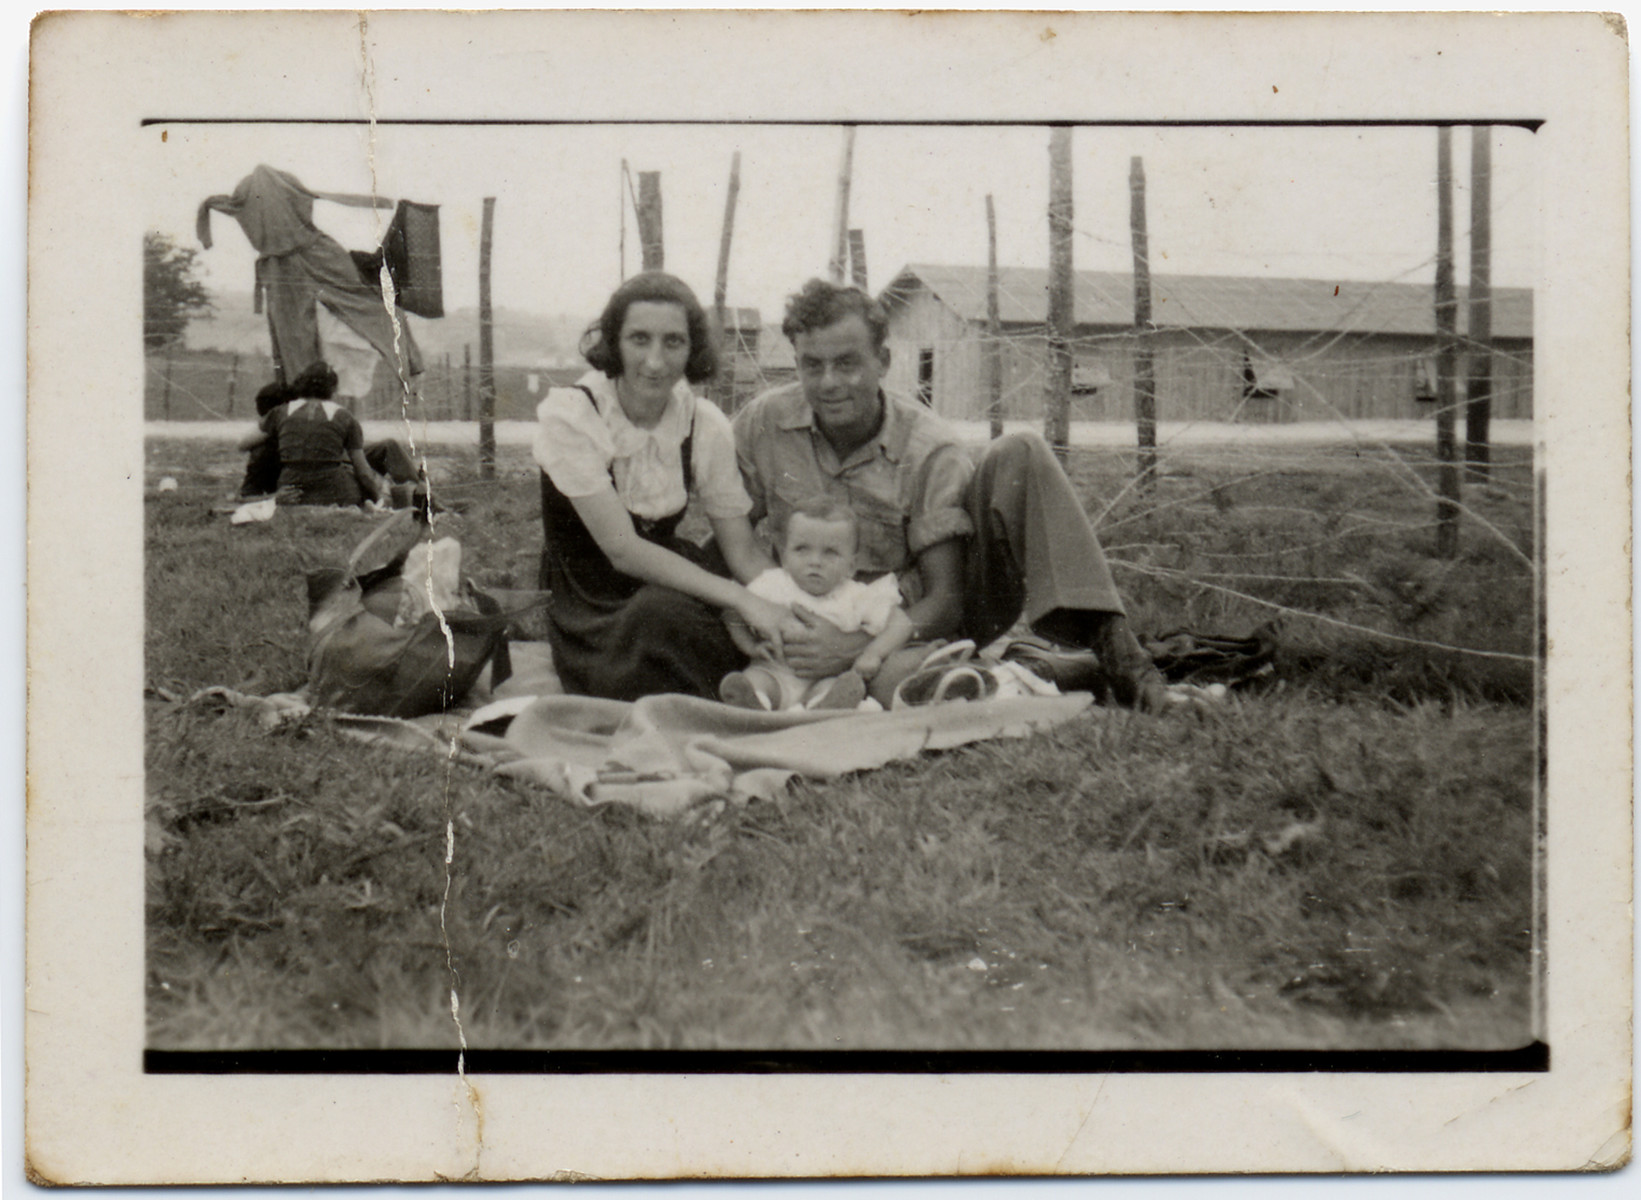 A couple with their young child sits on the grass near the barbed wire fence of the Gurs internment camp. 

Pictured are Tonia and Sioma Lechtman with their baby Vera.